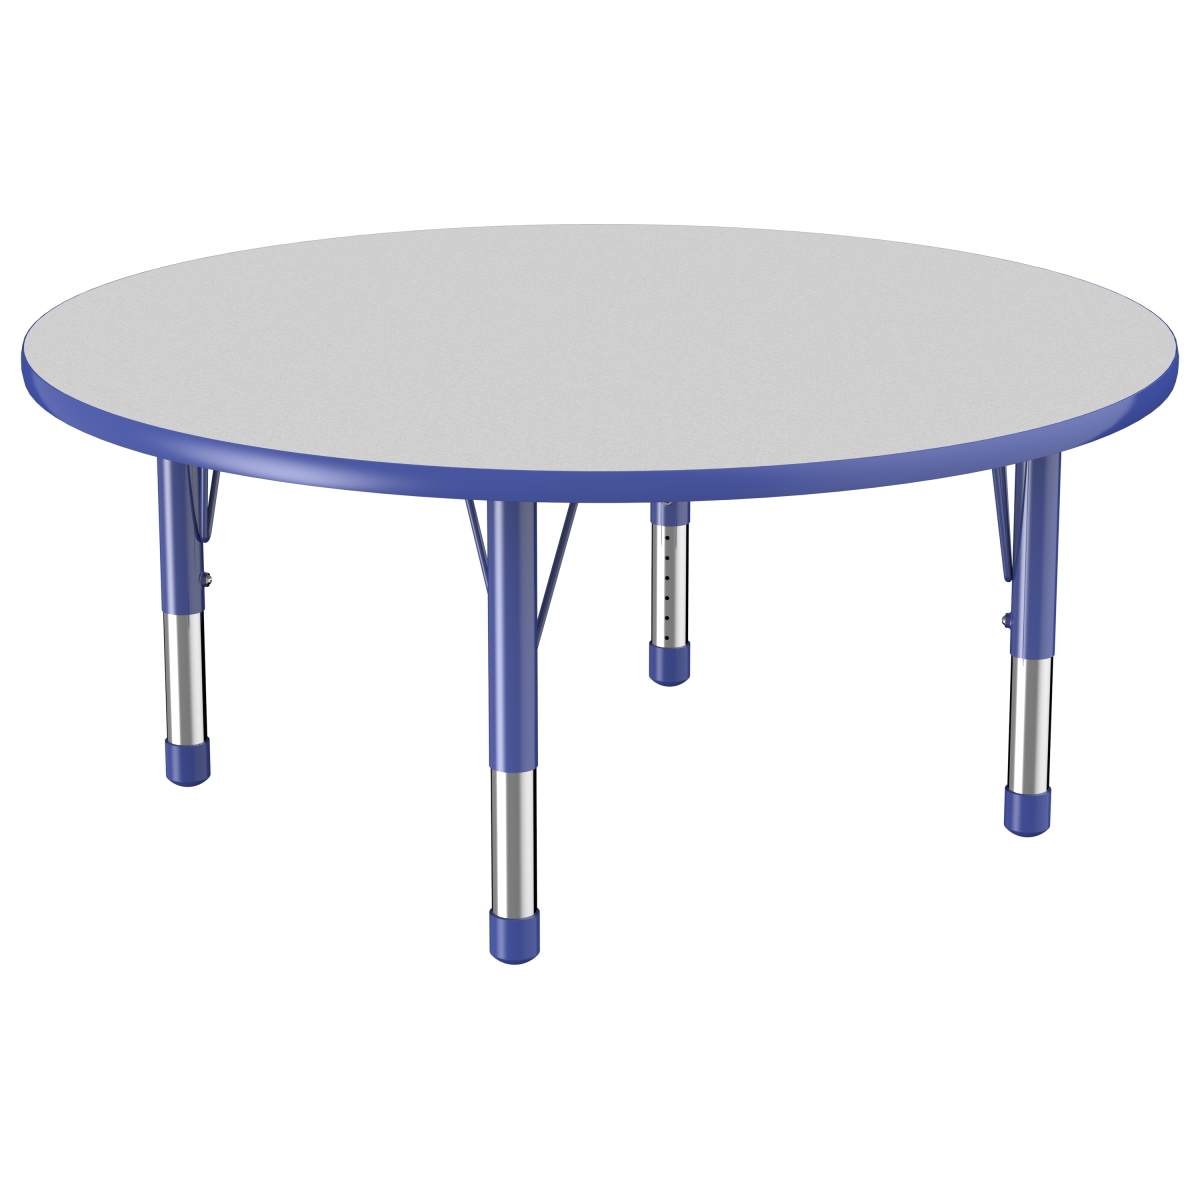 10045-gybl 48 In. Round T-mold Adjustable Activity Table With Chunky Leg - Grey & Blue